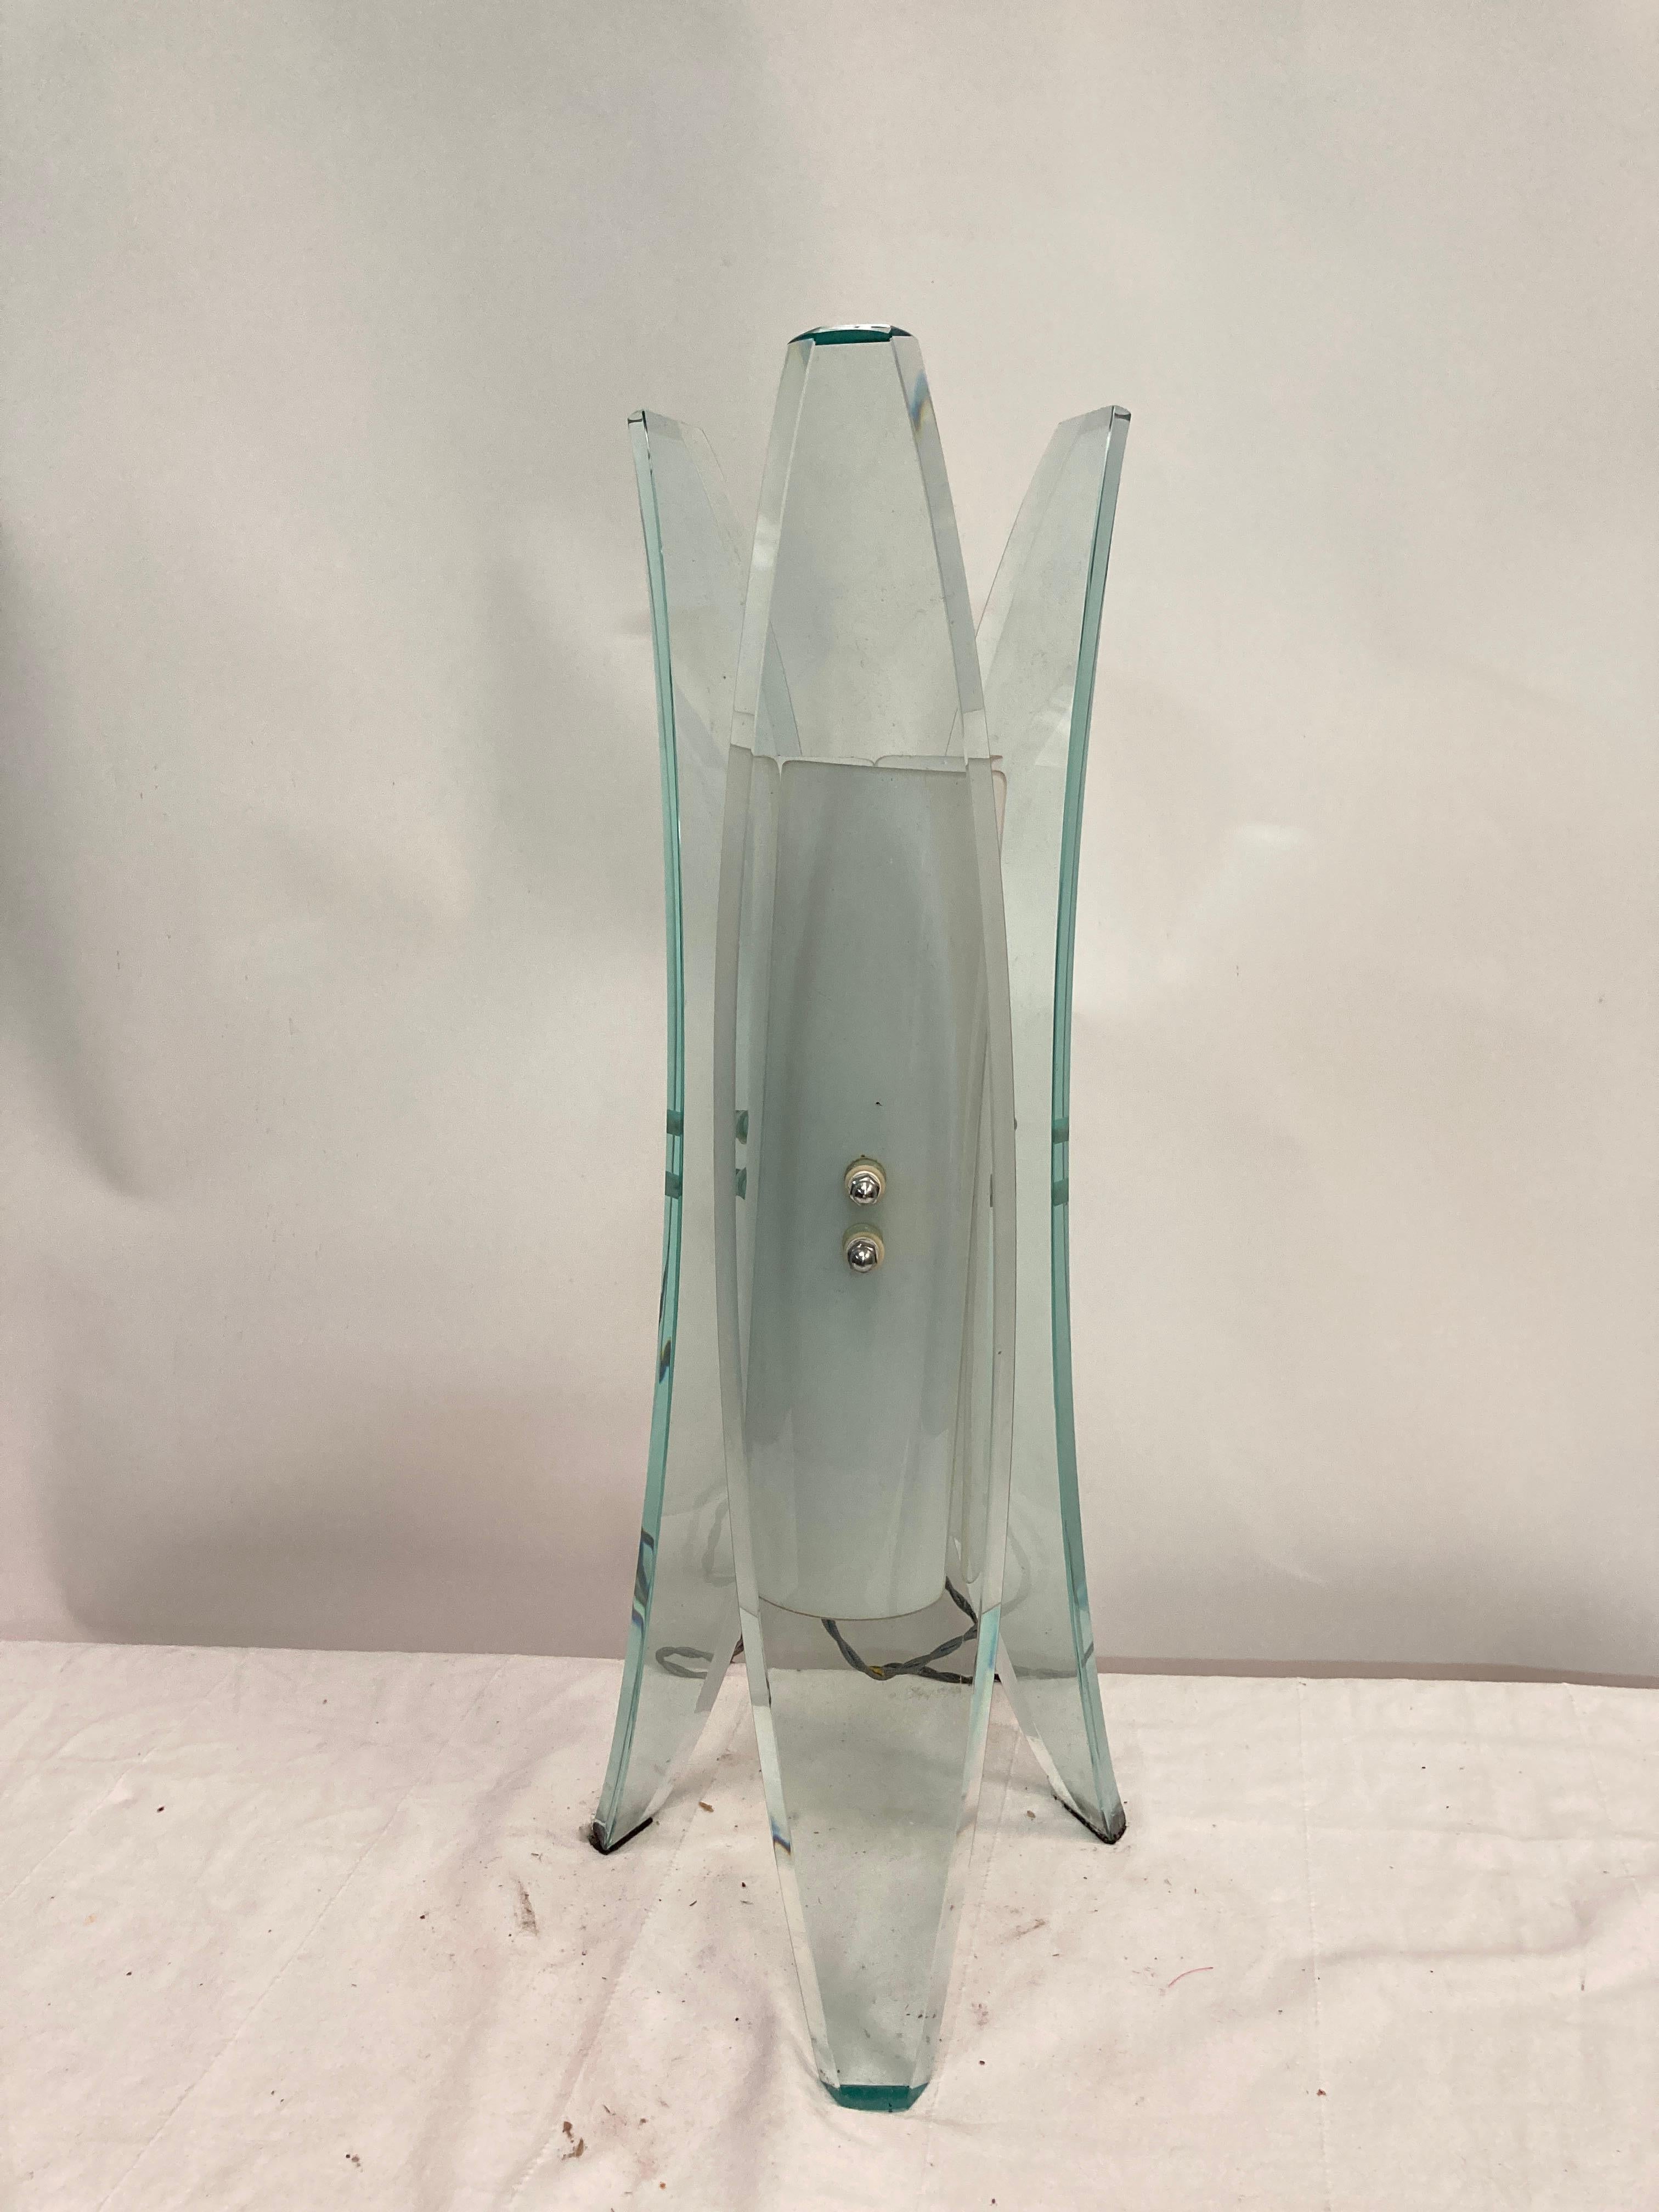 1970's Glass lamp attributed to Fontana Arté
Italy
one very little cheap on a low base feet
Very good overall condition